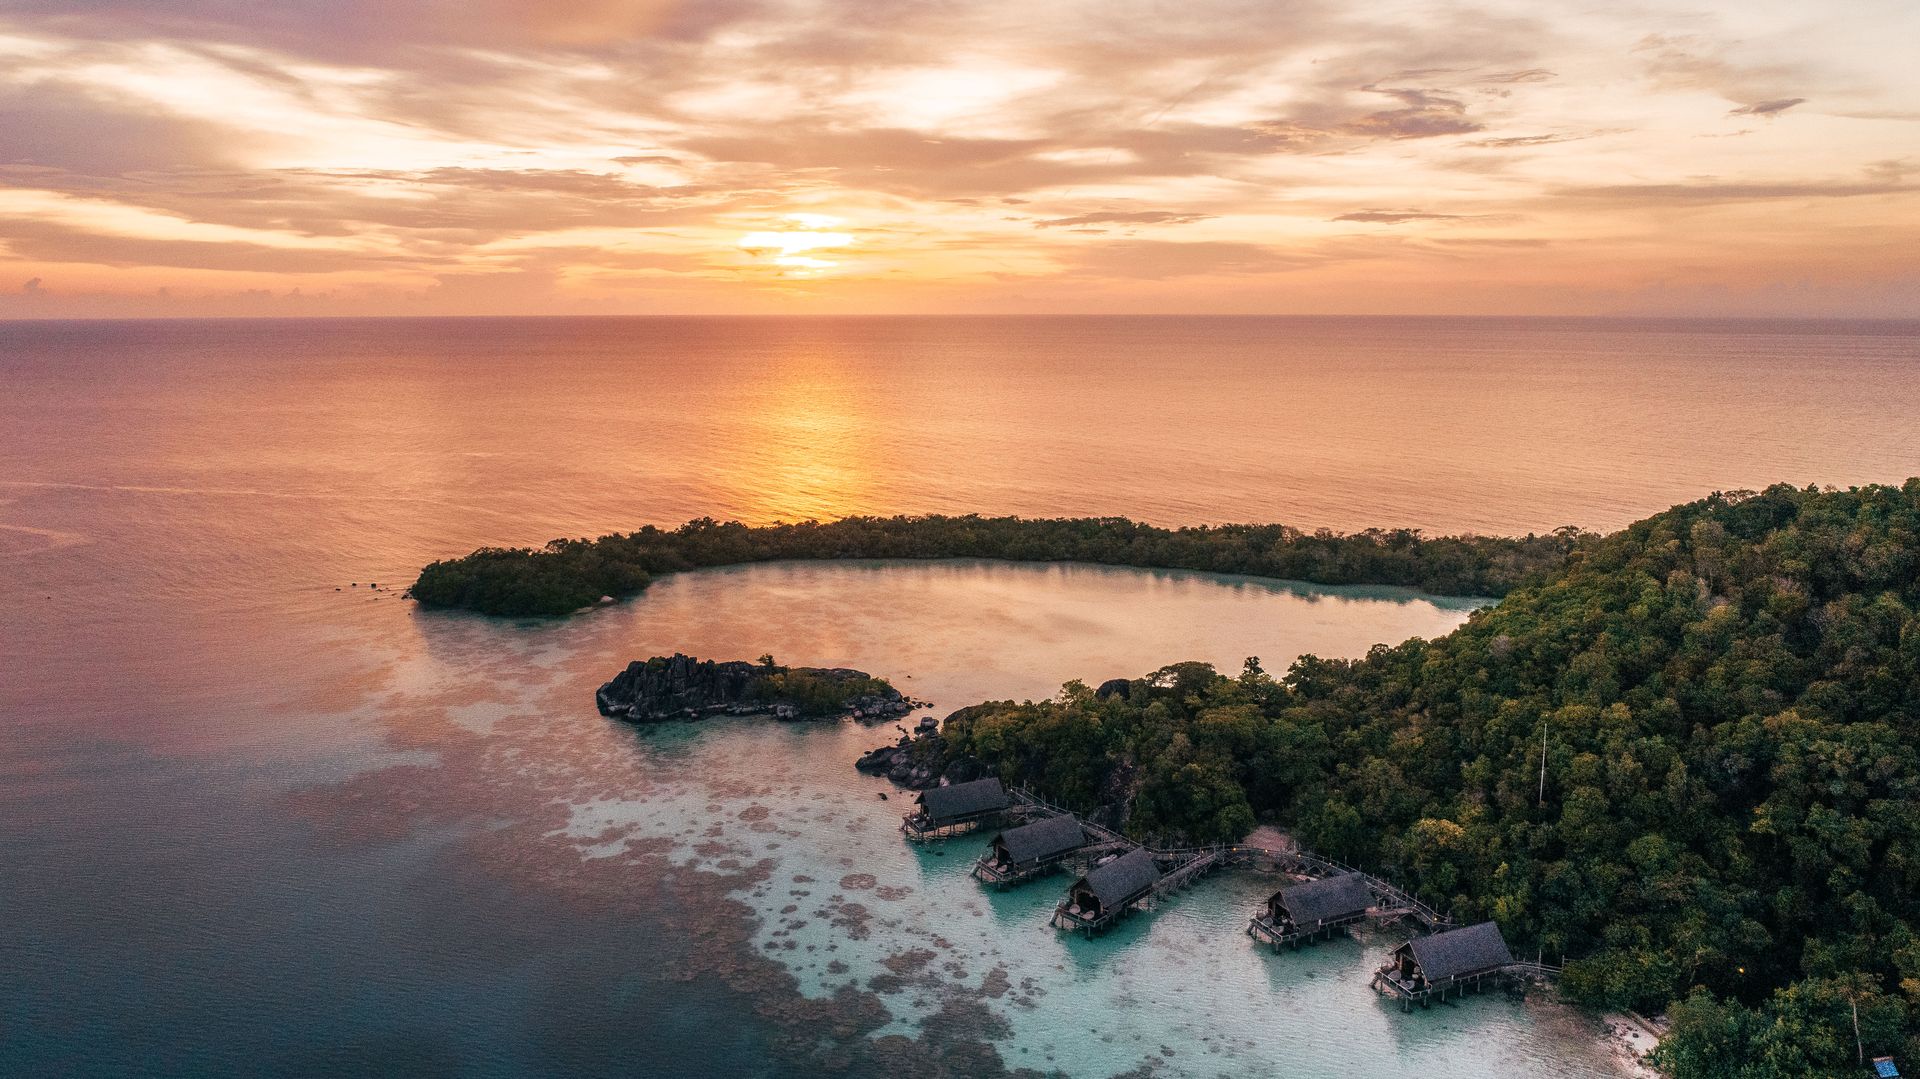 An aerial view of a small island in the middle of the ocean at sunset.